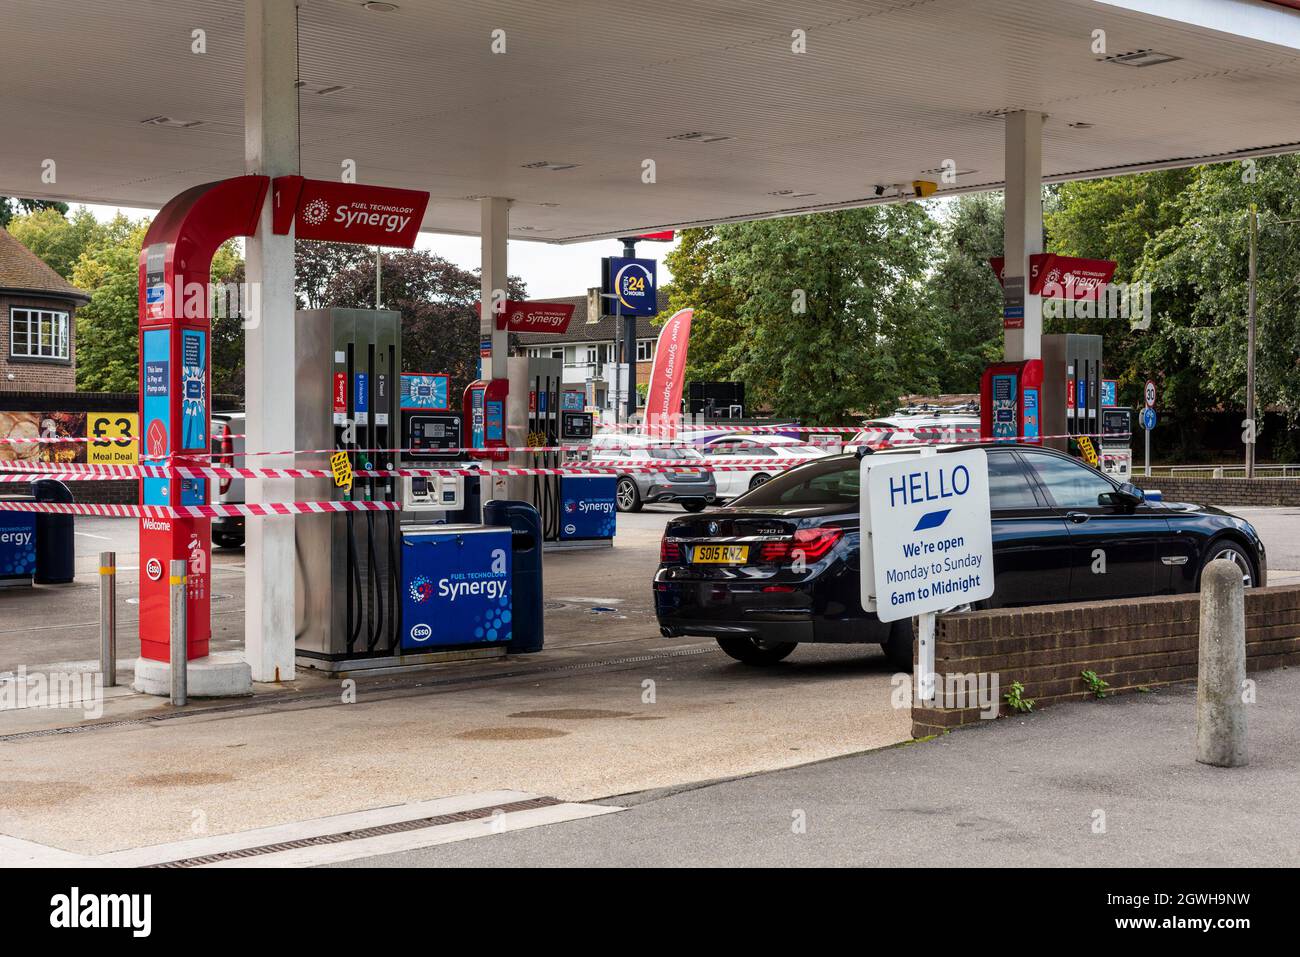 Edgware London UK, 3rd October 2021, Tesco Esso Pertrol Station, no fuel at pumps on forecourt due to fuel tank driver shortages and panic buying. Stock Photo